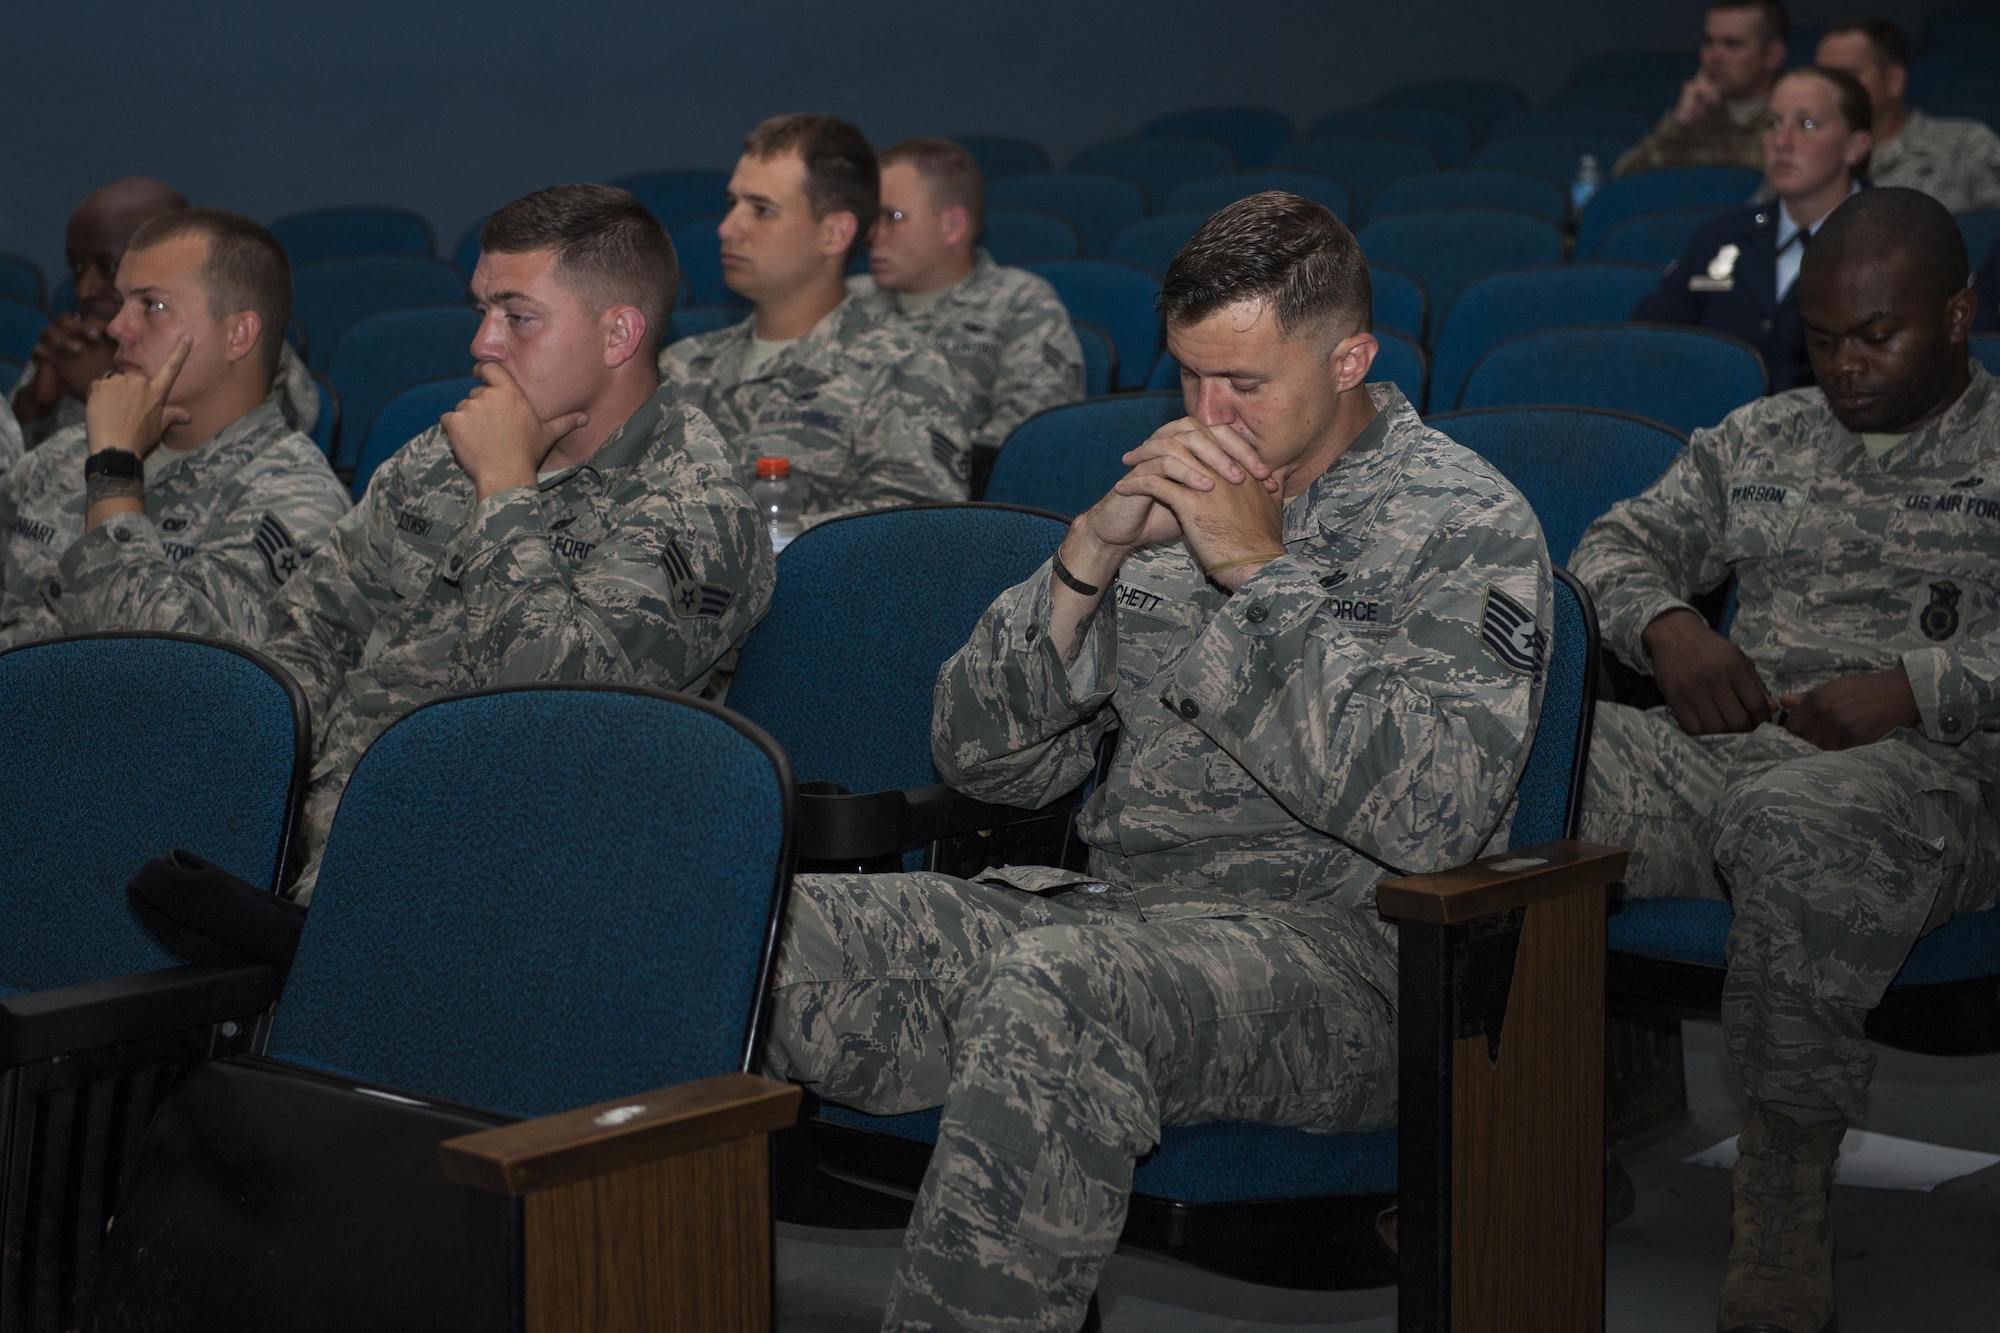 U.S. Air Force Airmen from the 23d Security Forces Squadron remember their fallen comrades as their names are recited during a retreat ceremony, May 20, 2016, at Moody Air Force Base, Ga. During the event, the names were read of all fallen Security Forces members since Operation Enduring Freedom, along with all fallen local law enforcement officers within the last year. (U.S. Air Force photo by Airman 1st Class Lauren M. Hunter/Released)